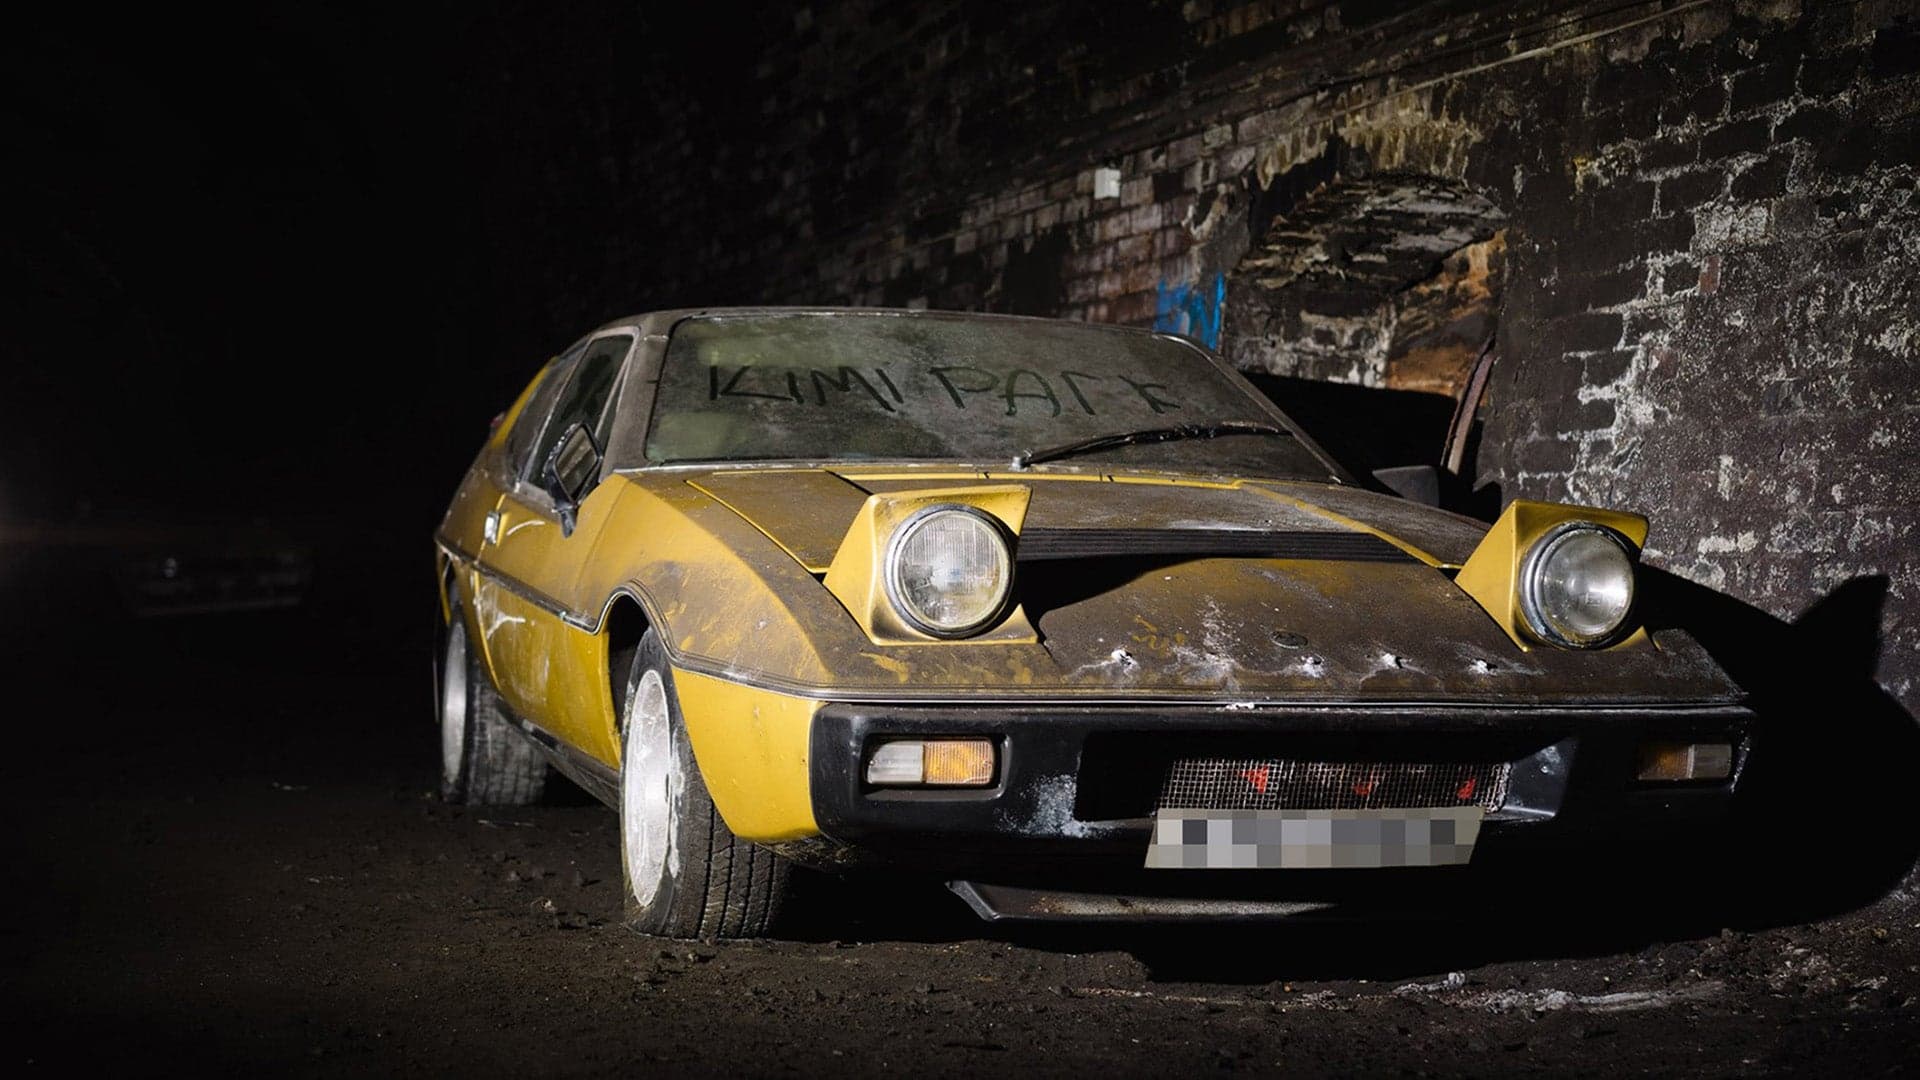 Photos Show Dozens of Classic Cars Abandoned in Collapsed Train Tunnel